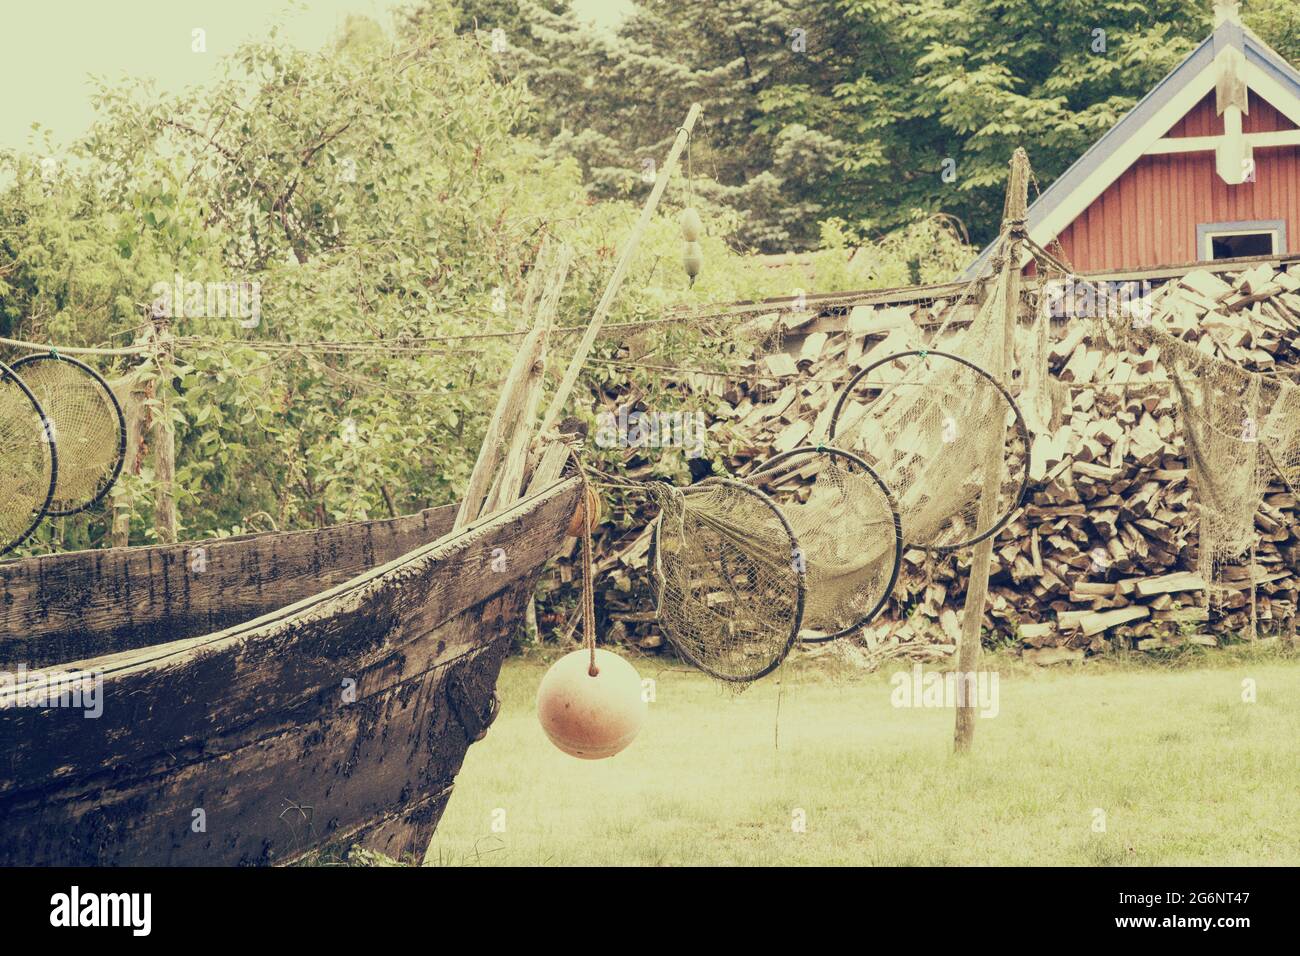 Old wooden fishing boat, drying up fishing net. Vintage filter effect Stock Photo